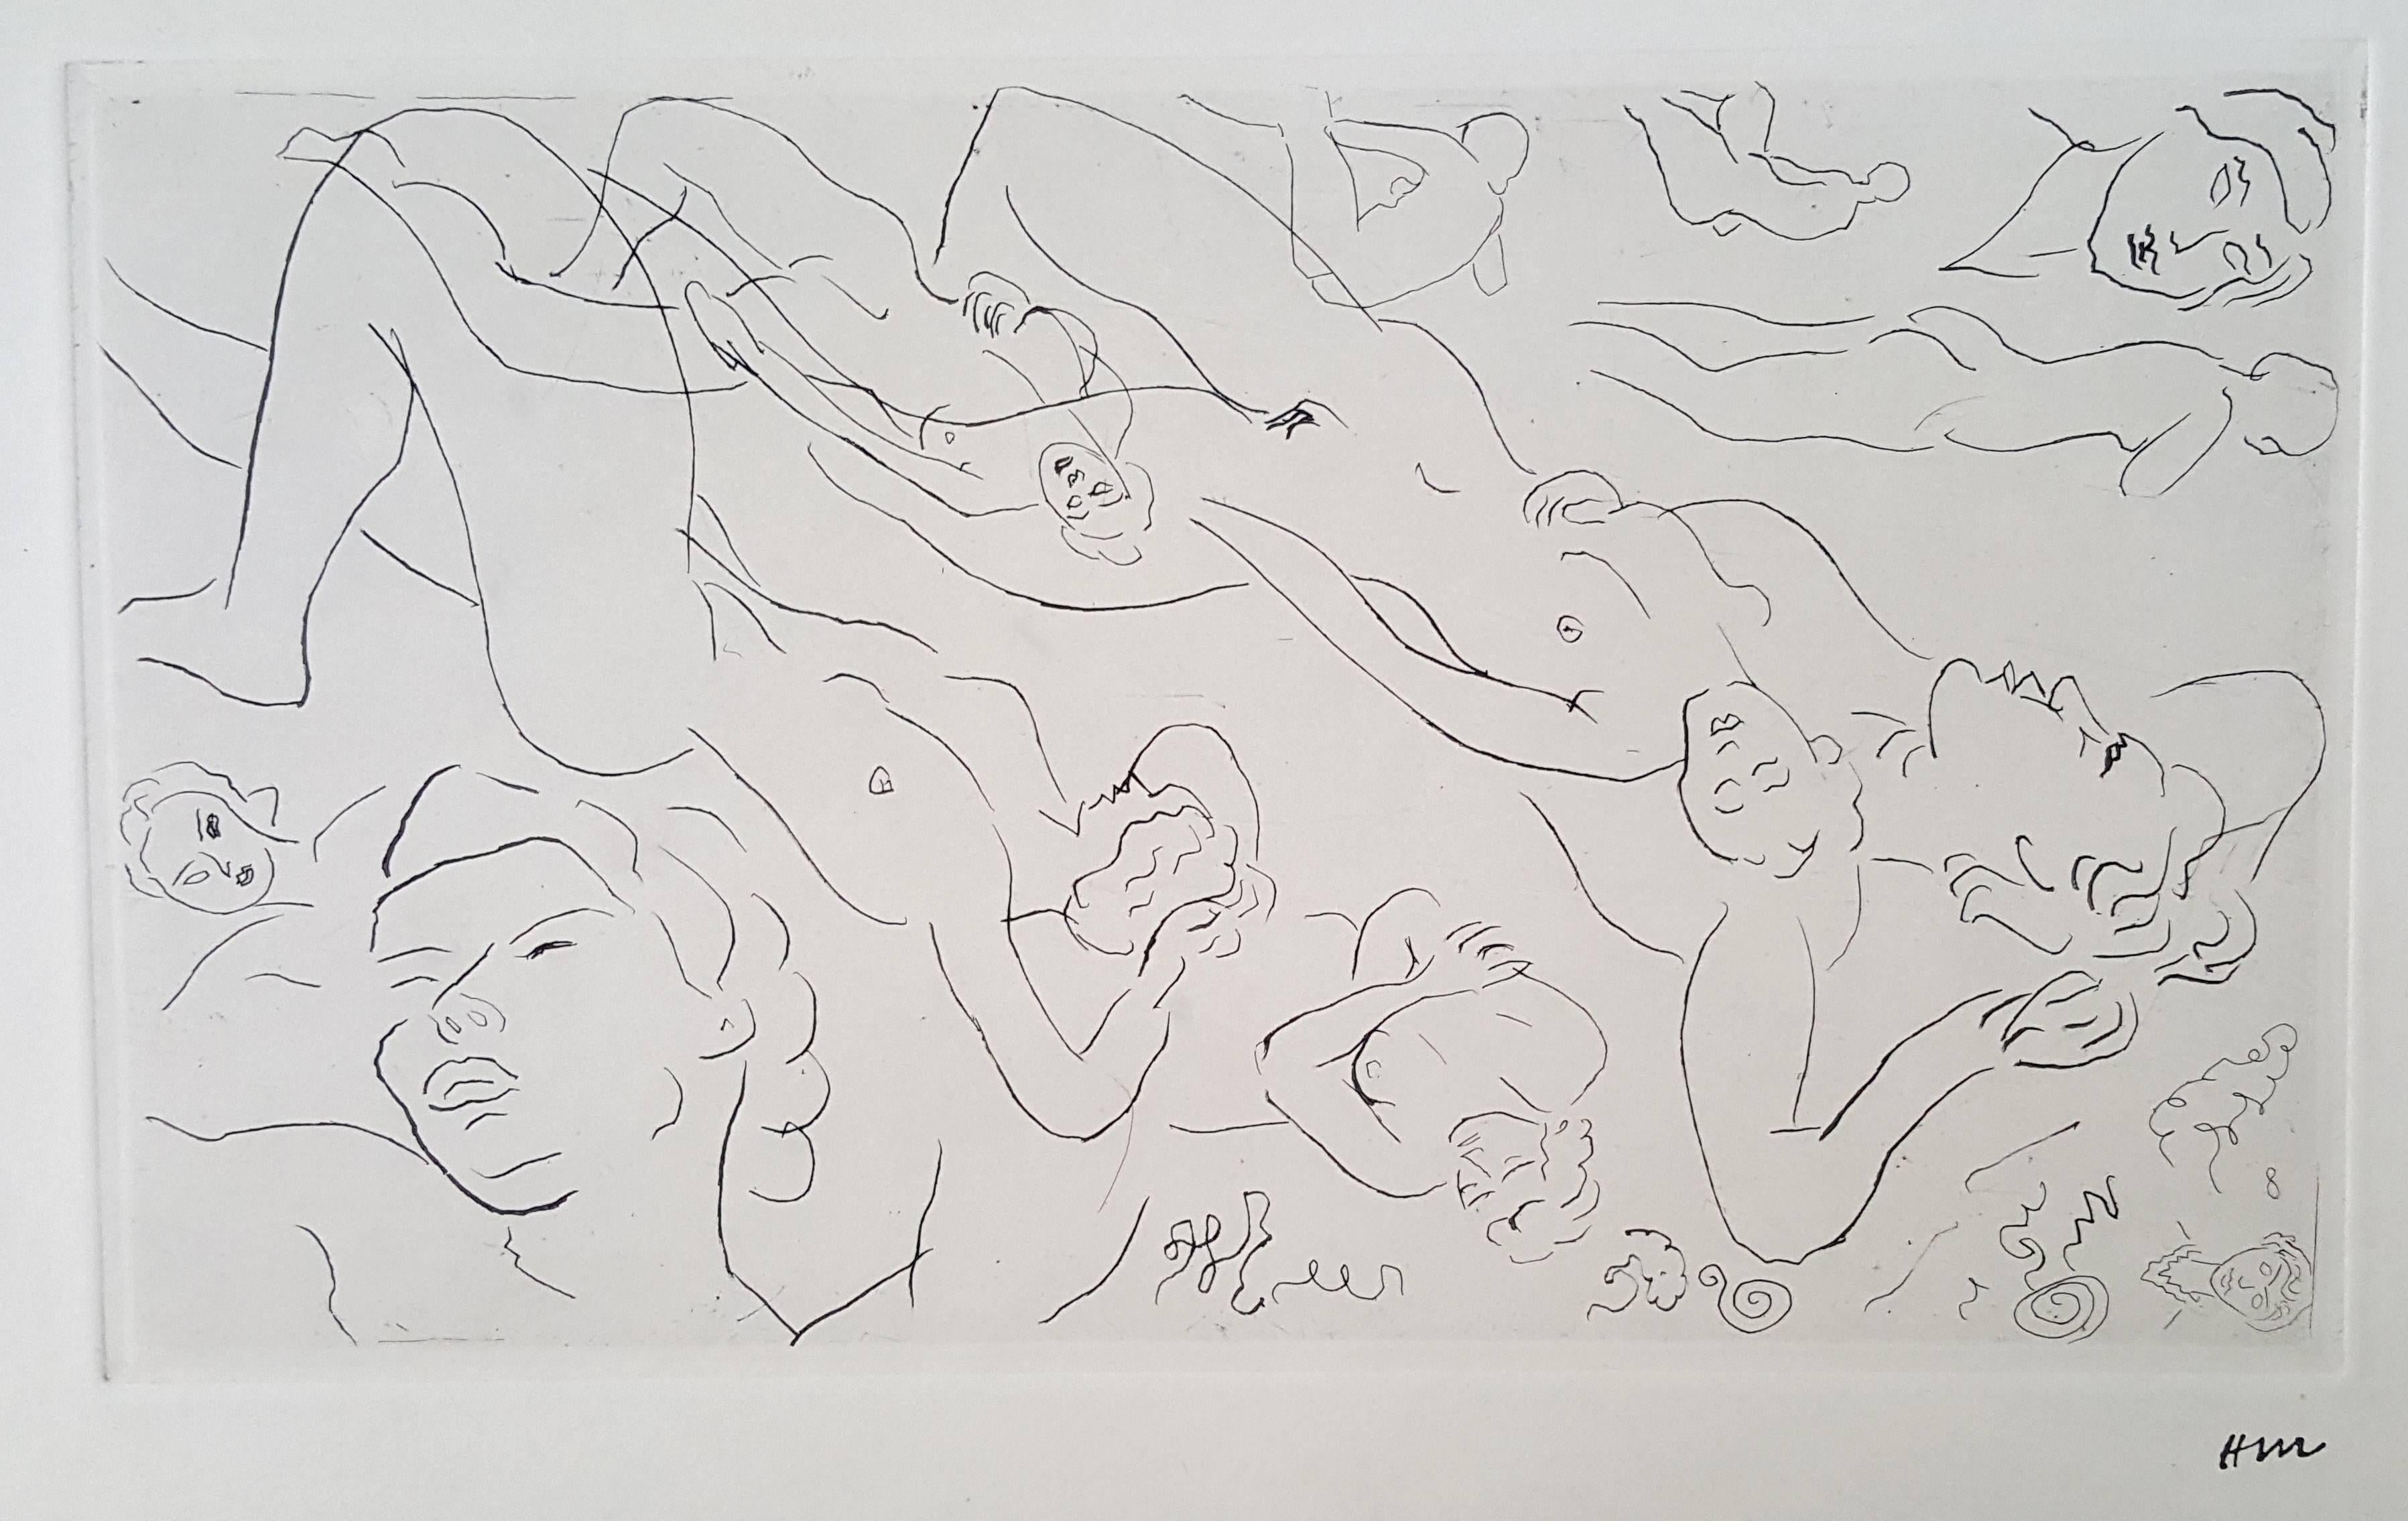 Study of Nudes - Original Etching - 125 copies - Stamp Signed - Print by Henri Matisse